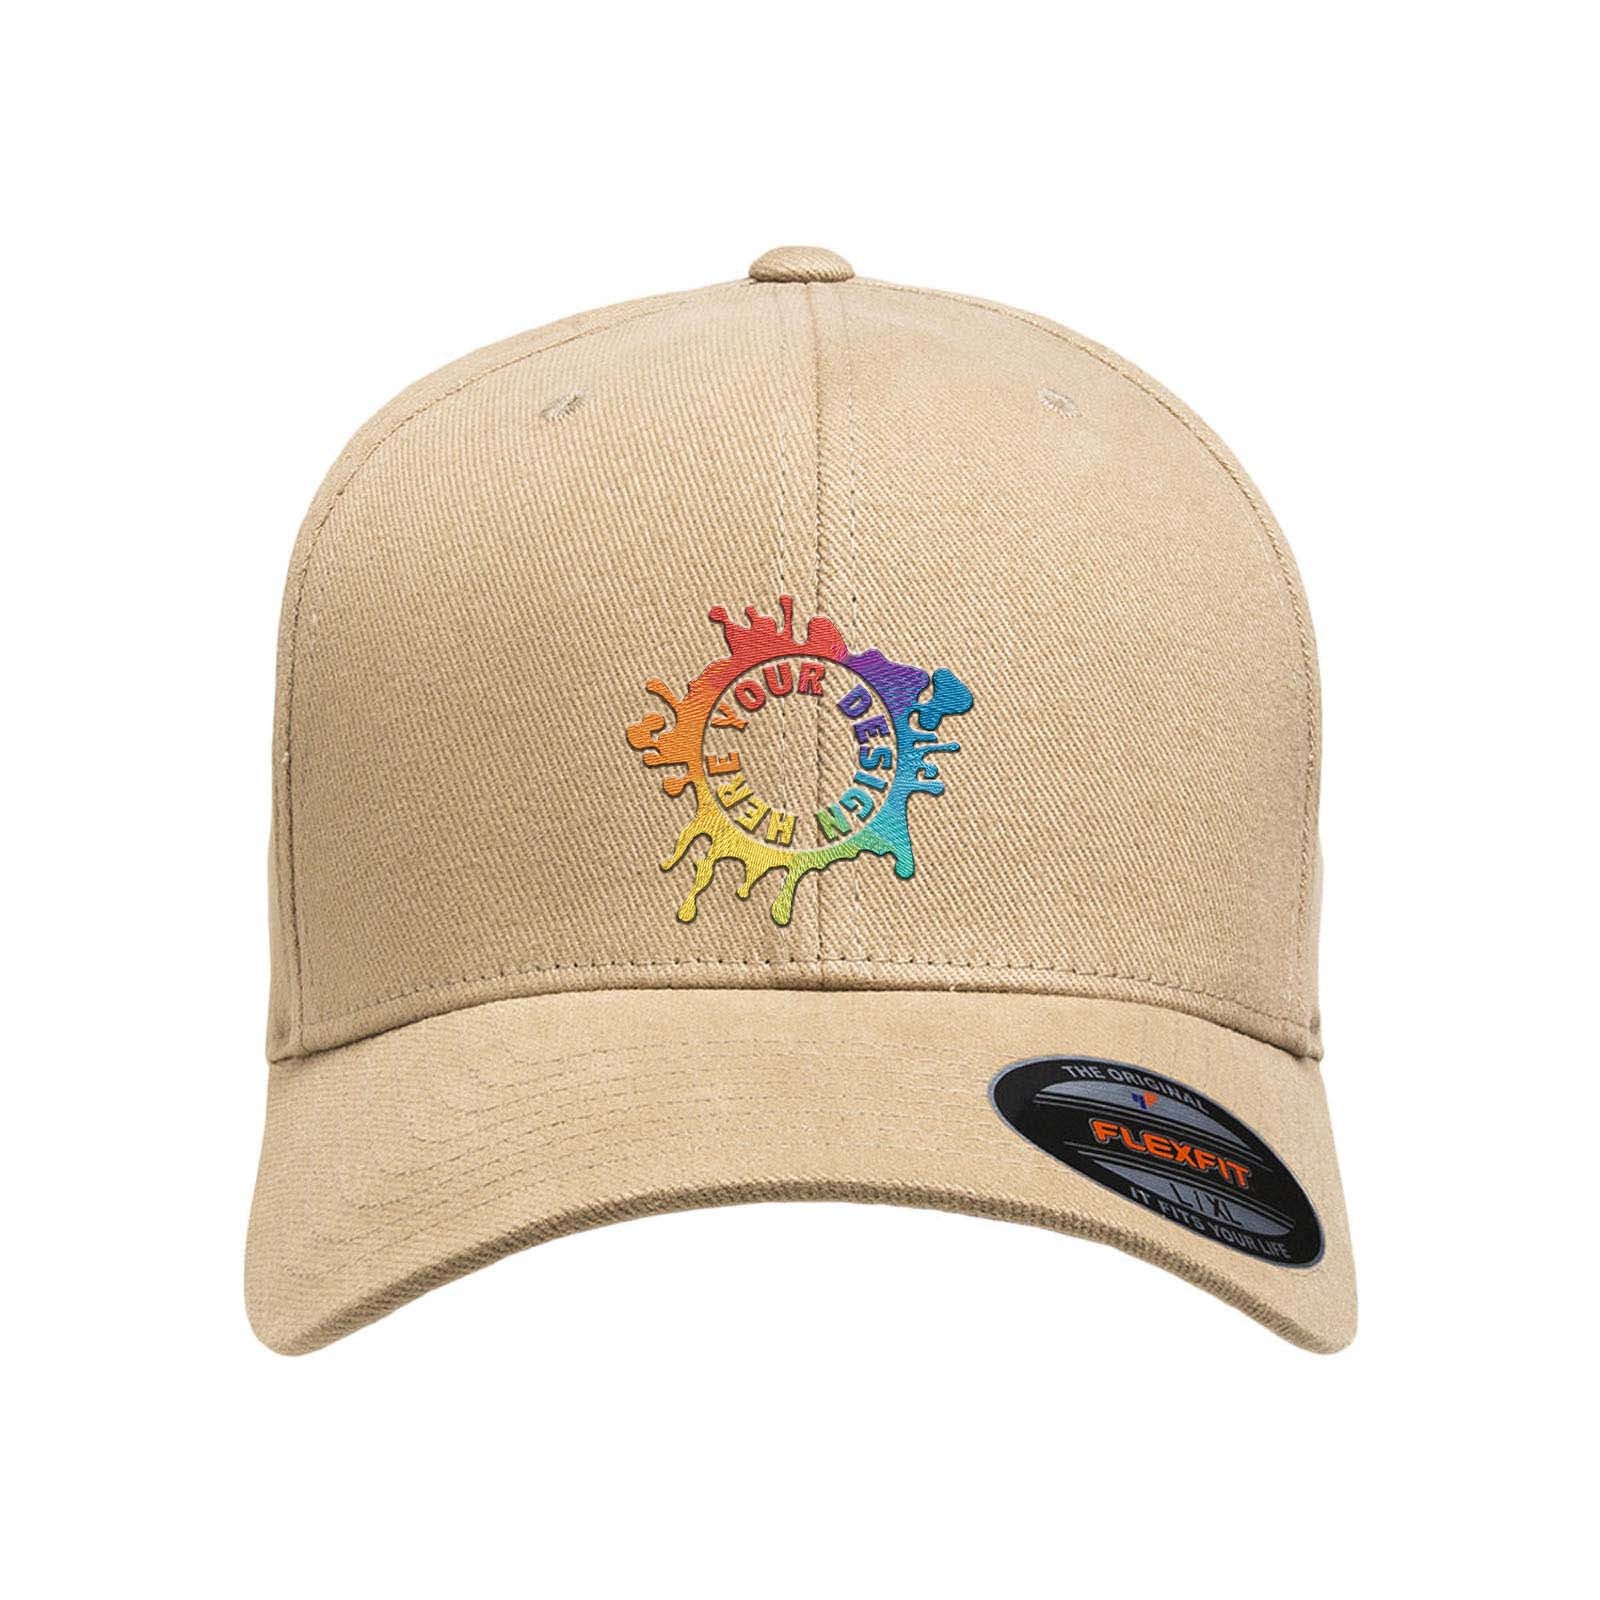 Embroidered Flexfit Adult Brushed Twill Cap - Mato & Hash